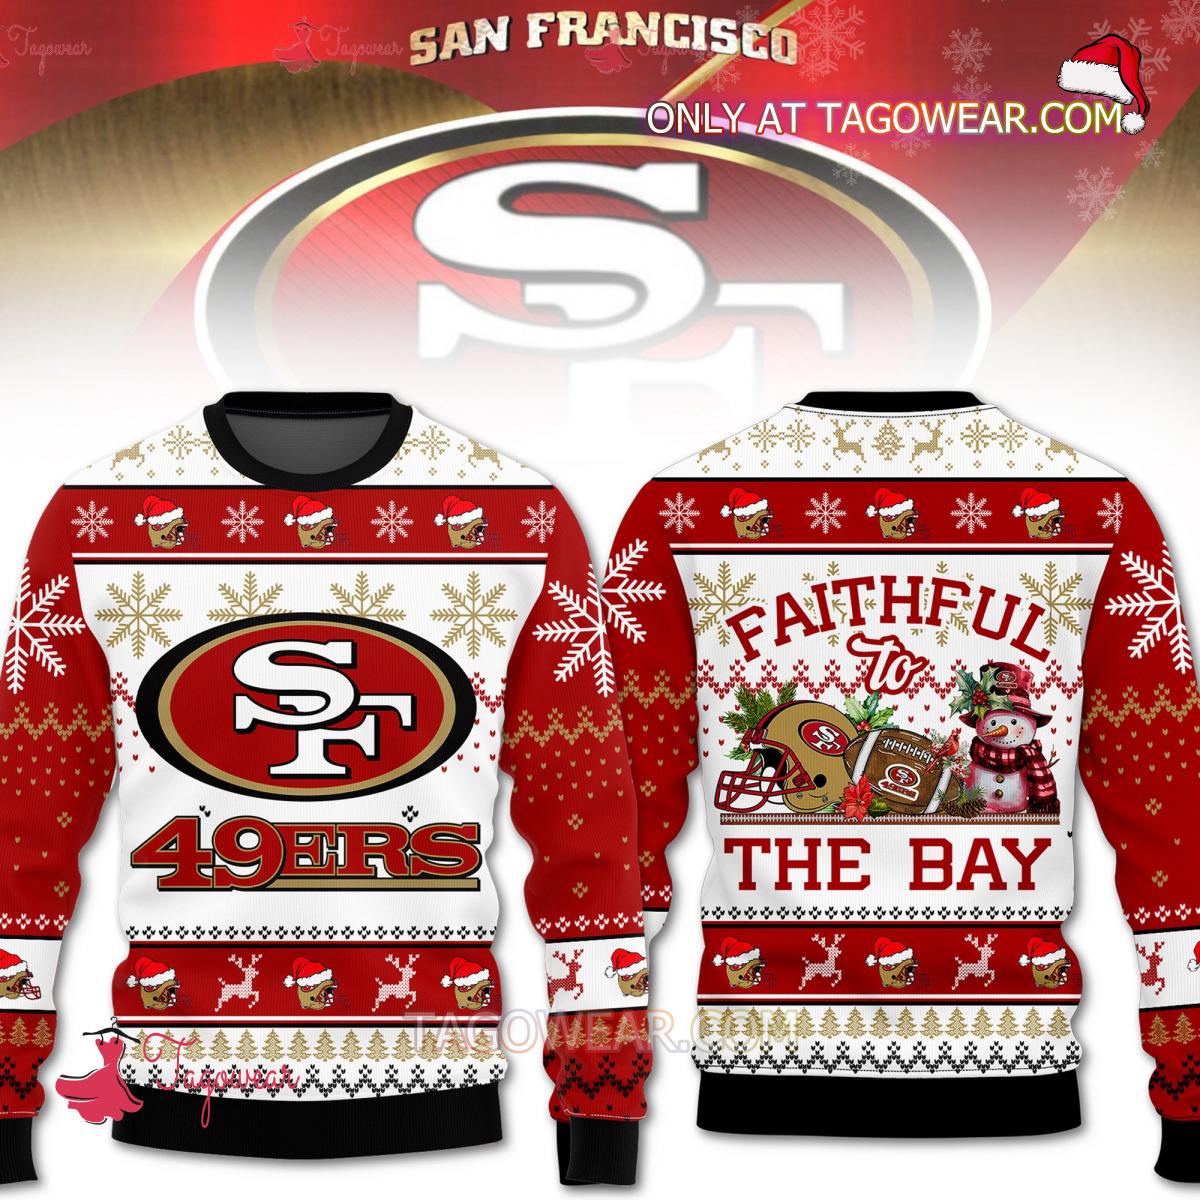 San Francisco 49ers Faithful To The Bay Ugly Christmas Sweater - Tagowear